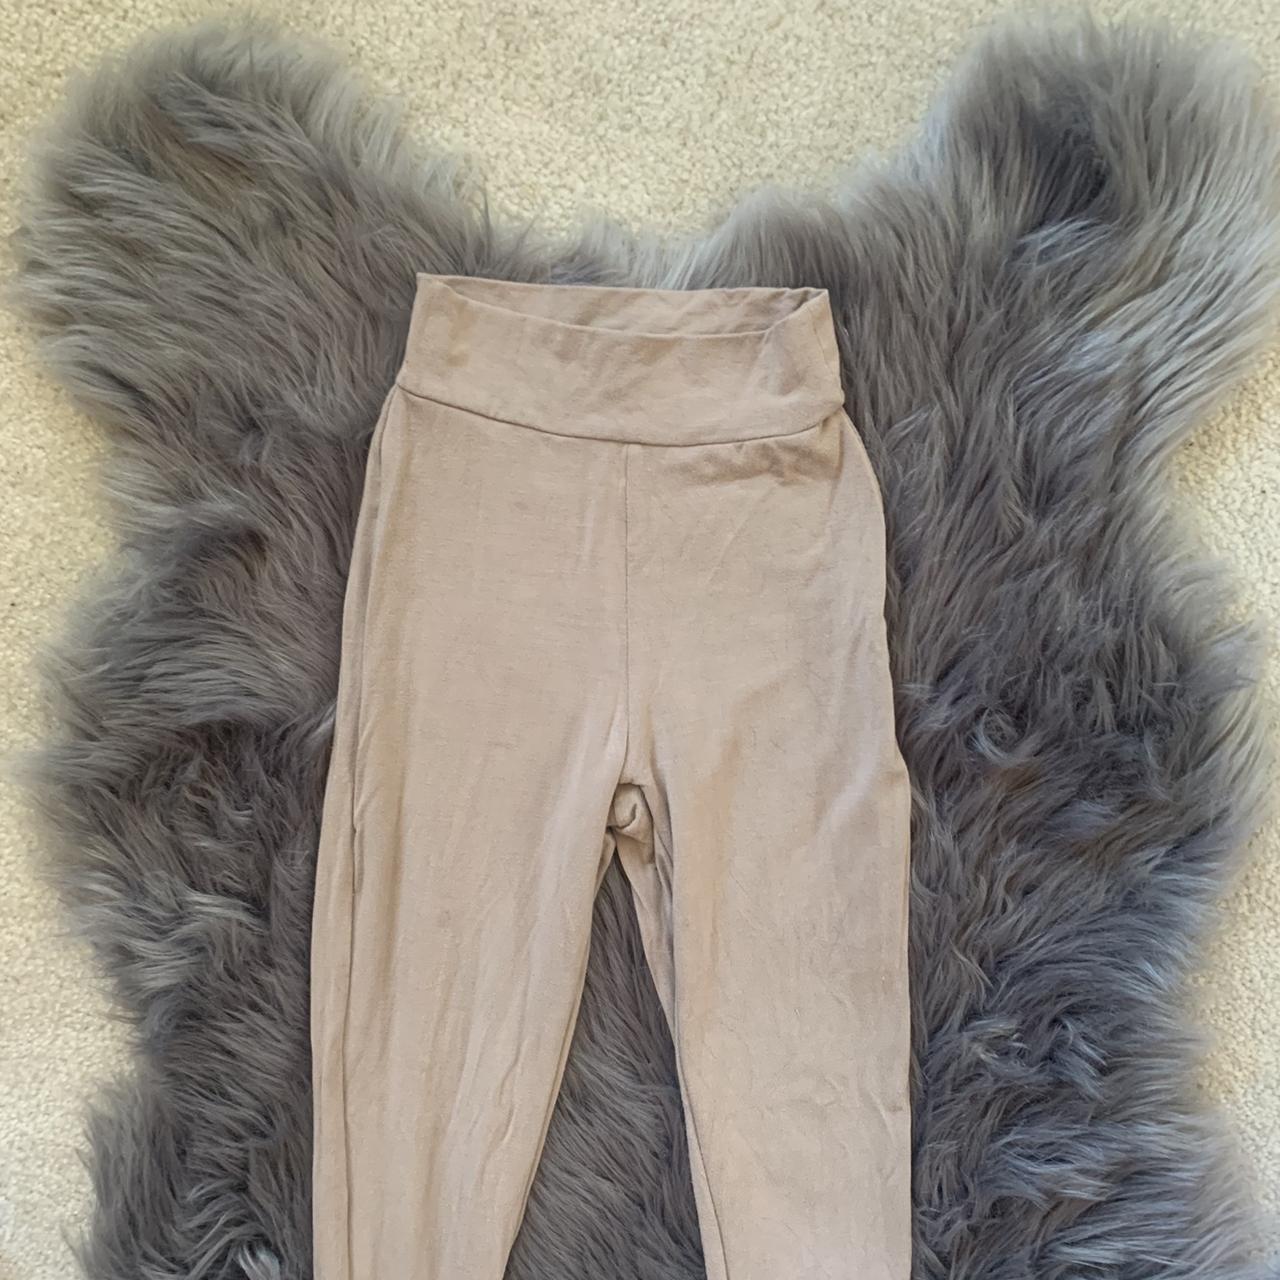 OhPolly double layered nude leggings UK8 Brand new... - Depop